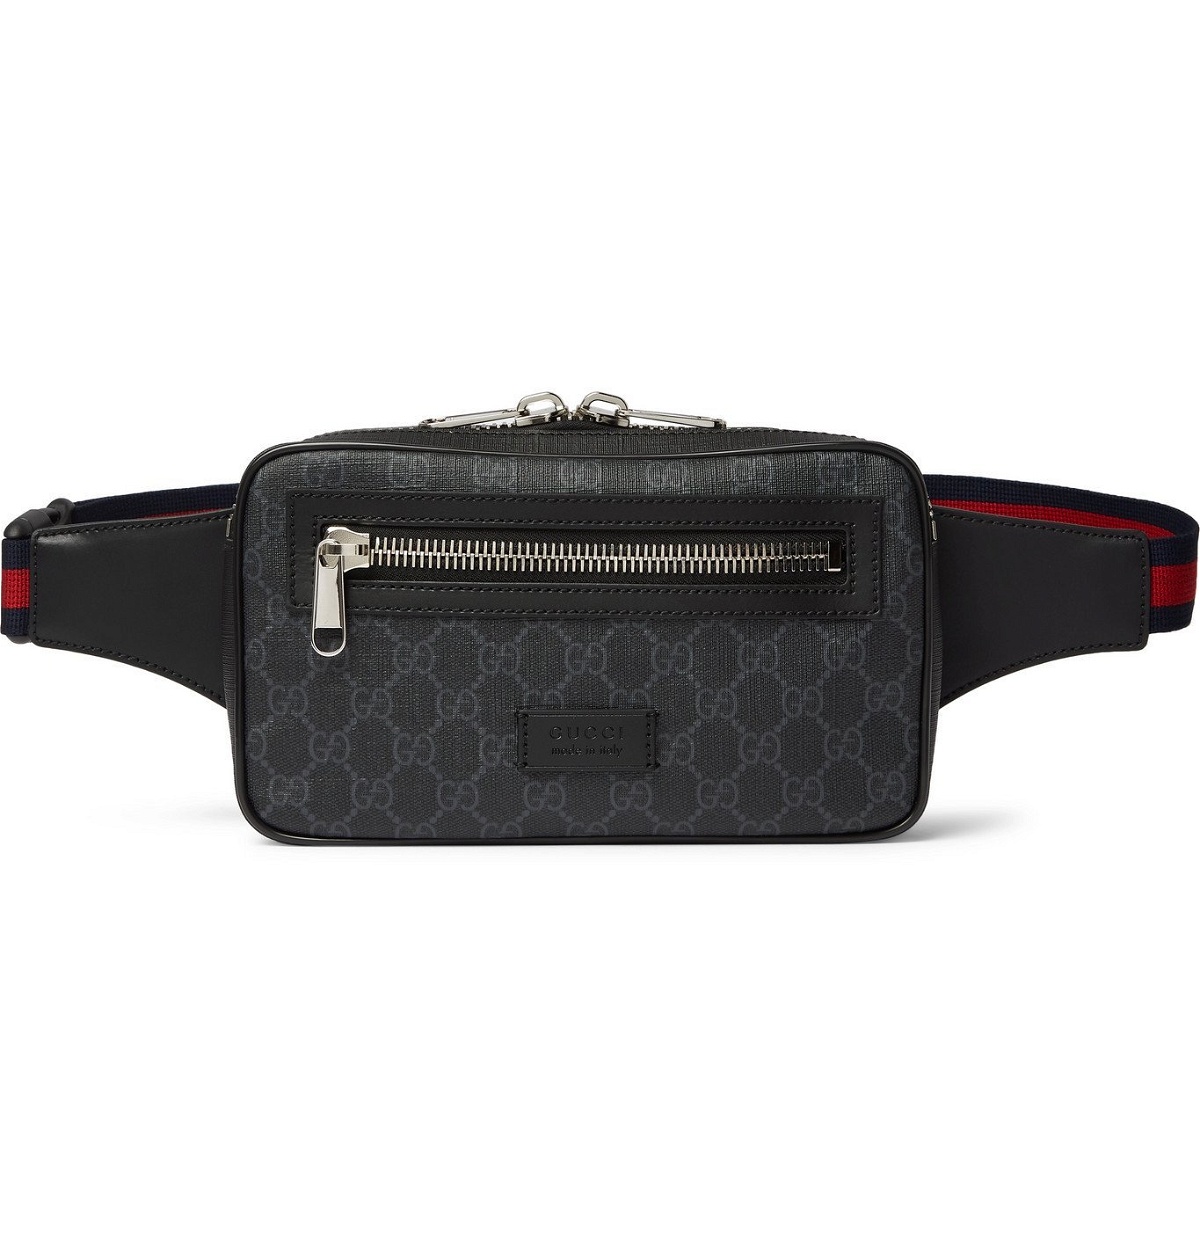 Gucci GG Canvas & Leather Belt Bag in Gray for Men